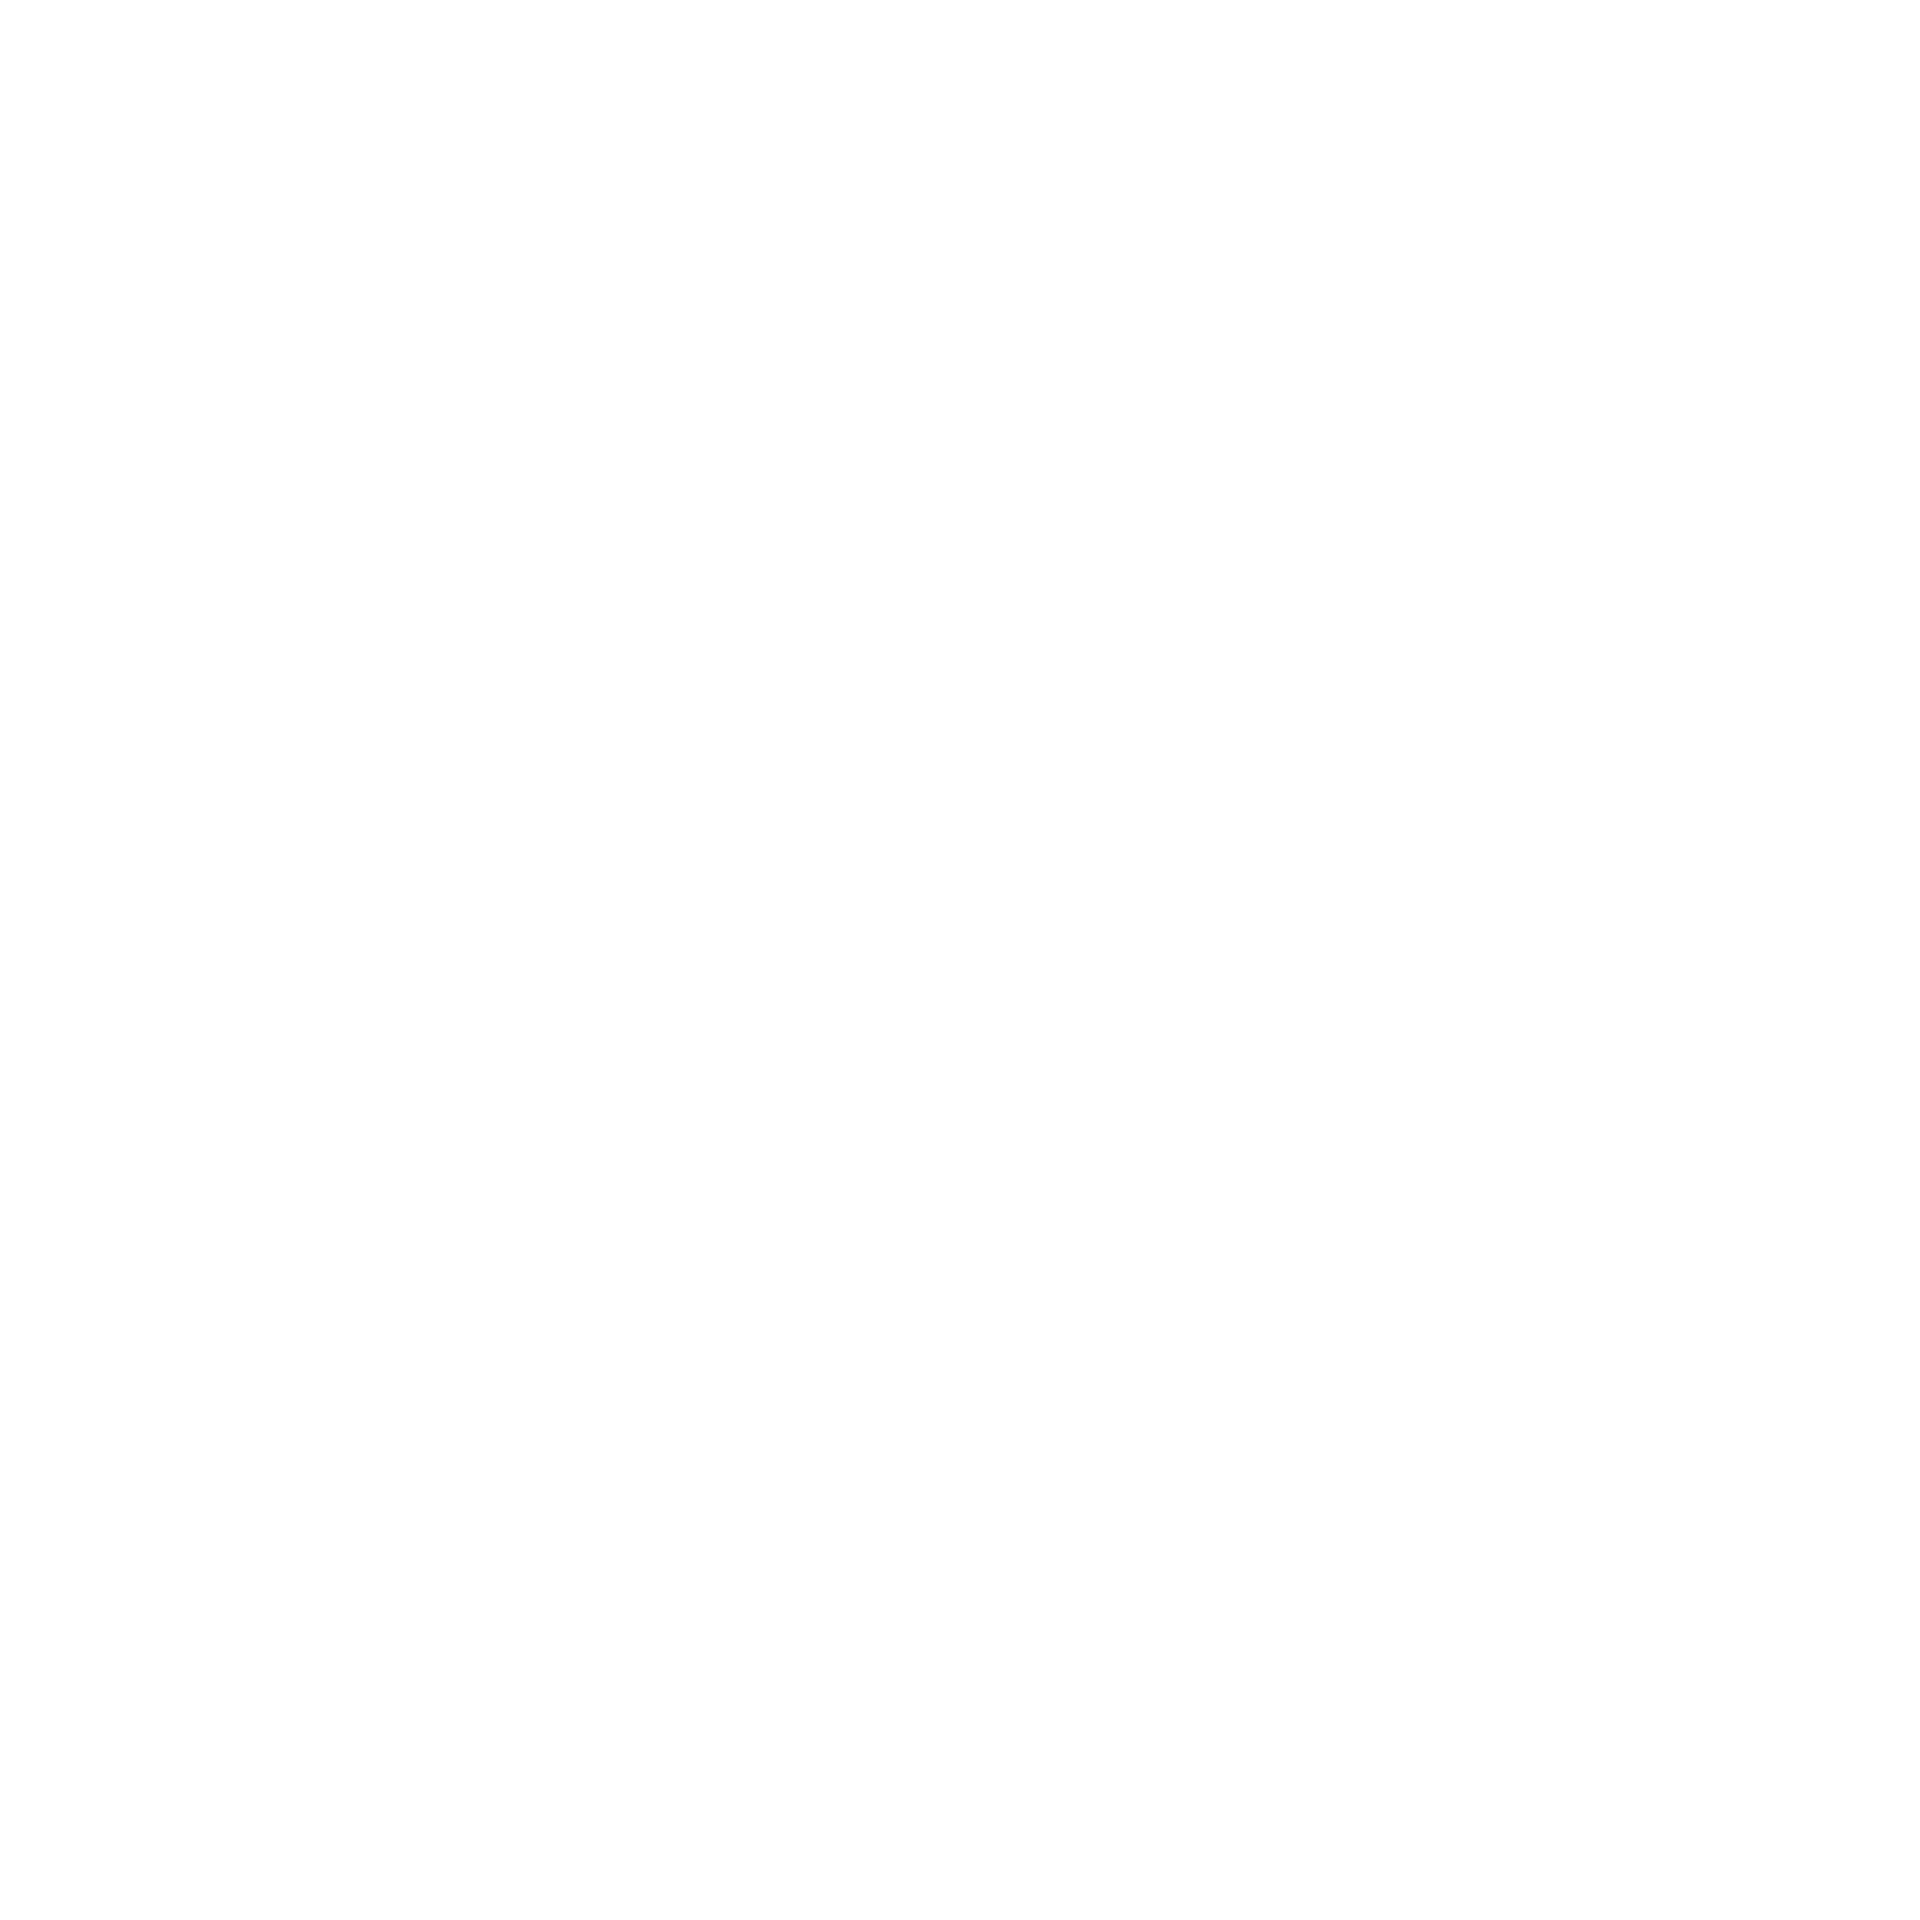 https://paddock-life.com/wp-content/themes/phins_theme/images/logo-text.png